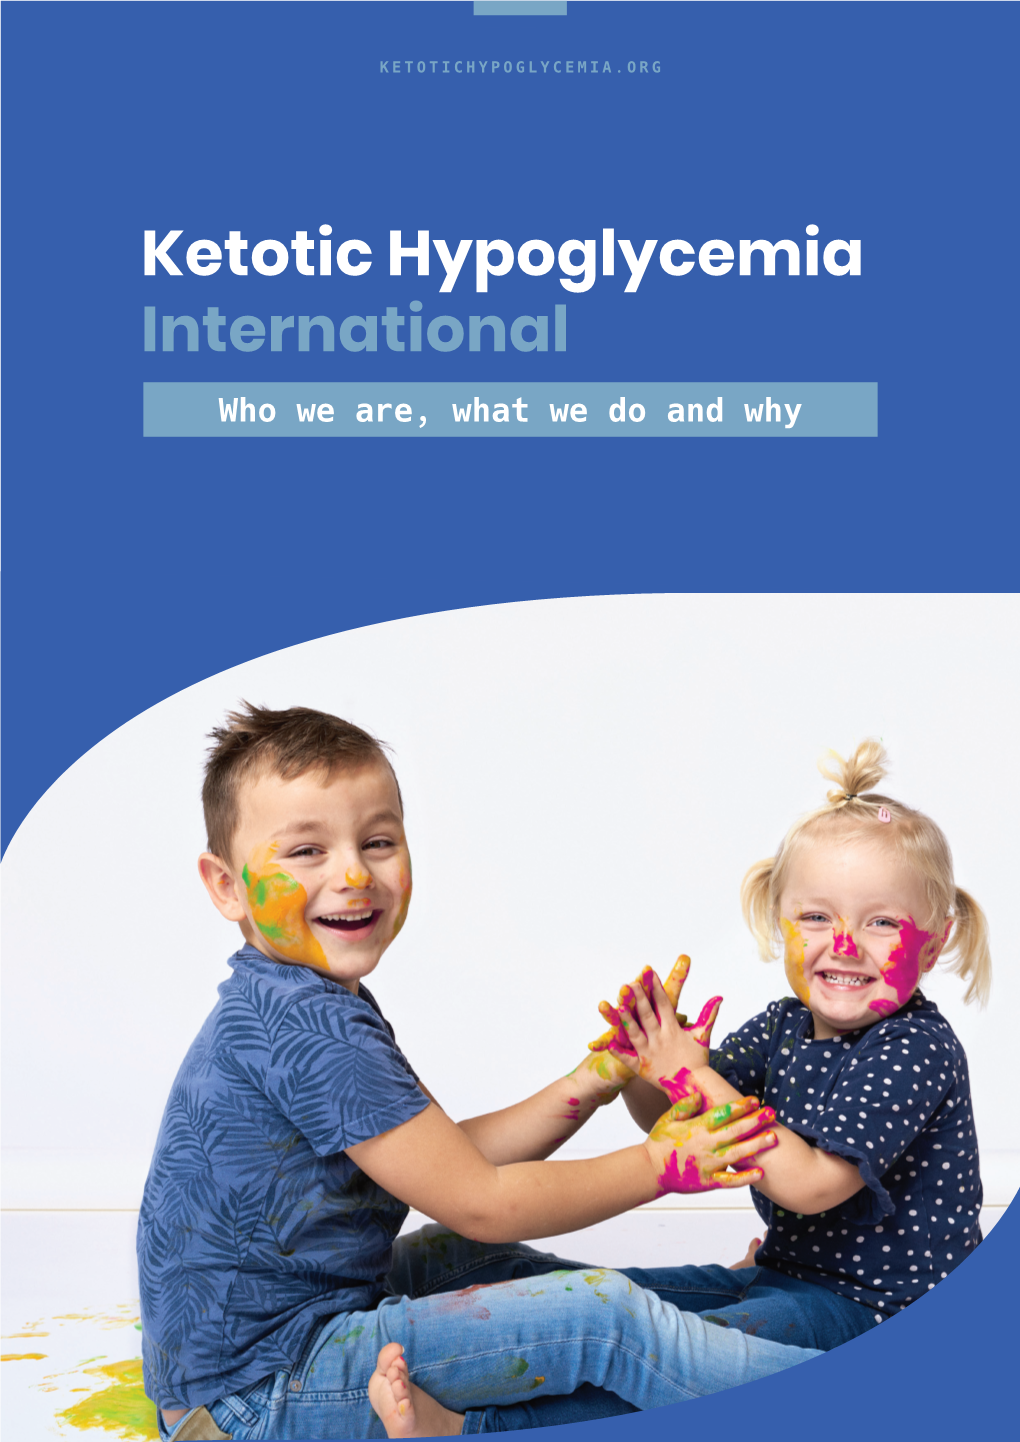 What Is Ketotic Hypoglycemia?